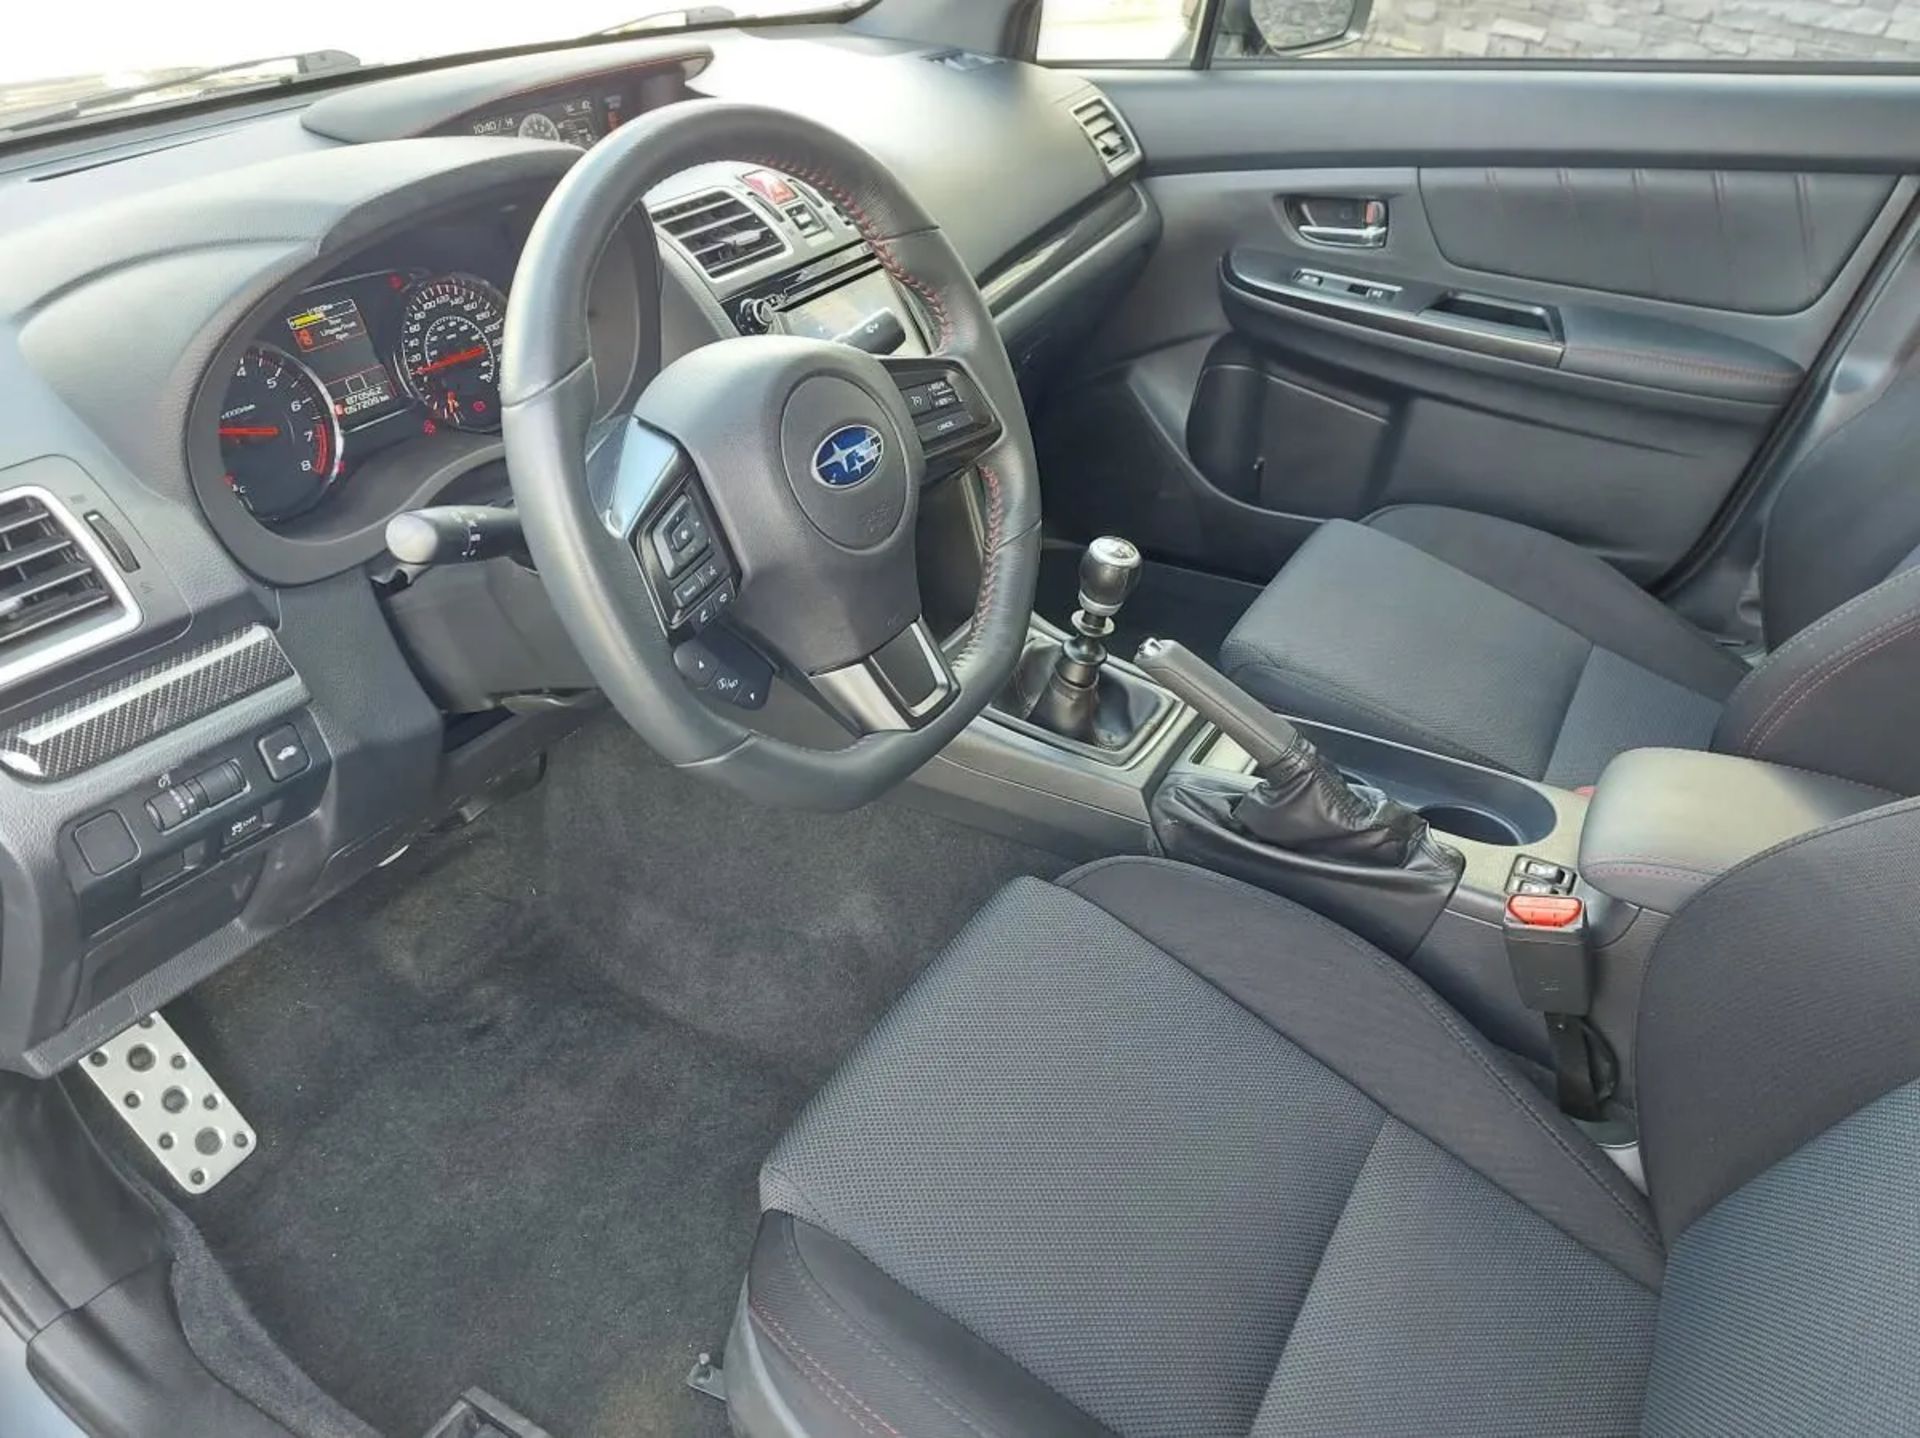 2021 SUBARU WRX 6 SPEED! ONE OWNER! NO MODS! CLEAN CARFAX! - Image 9 of 29